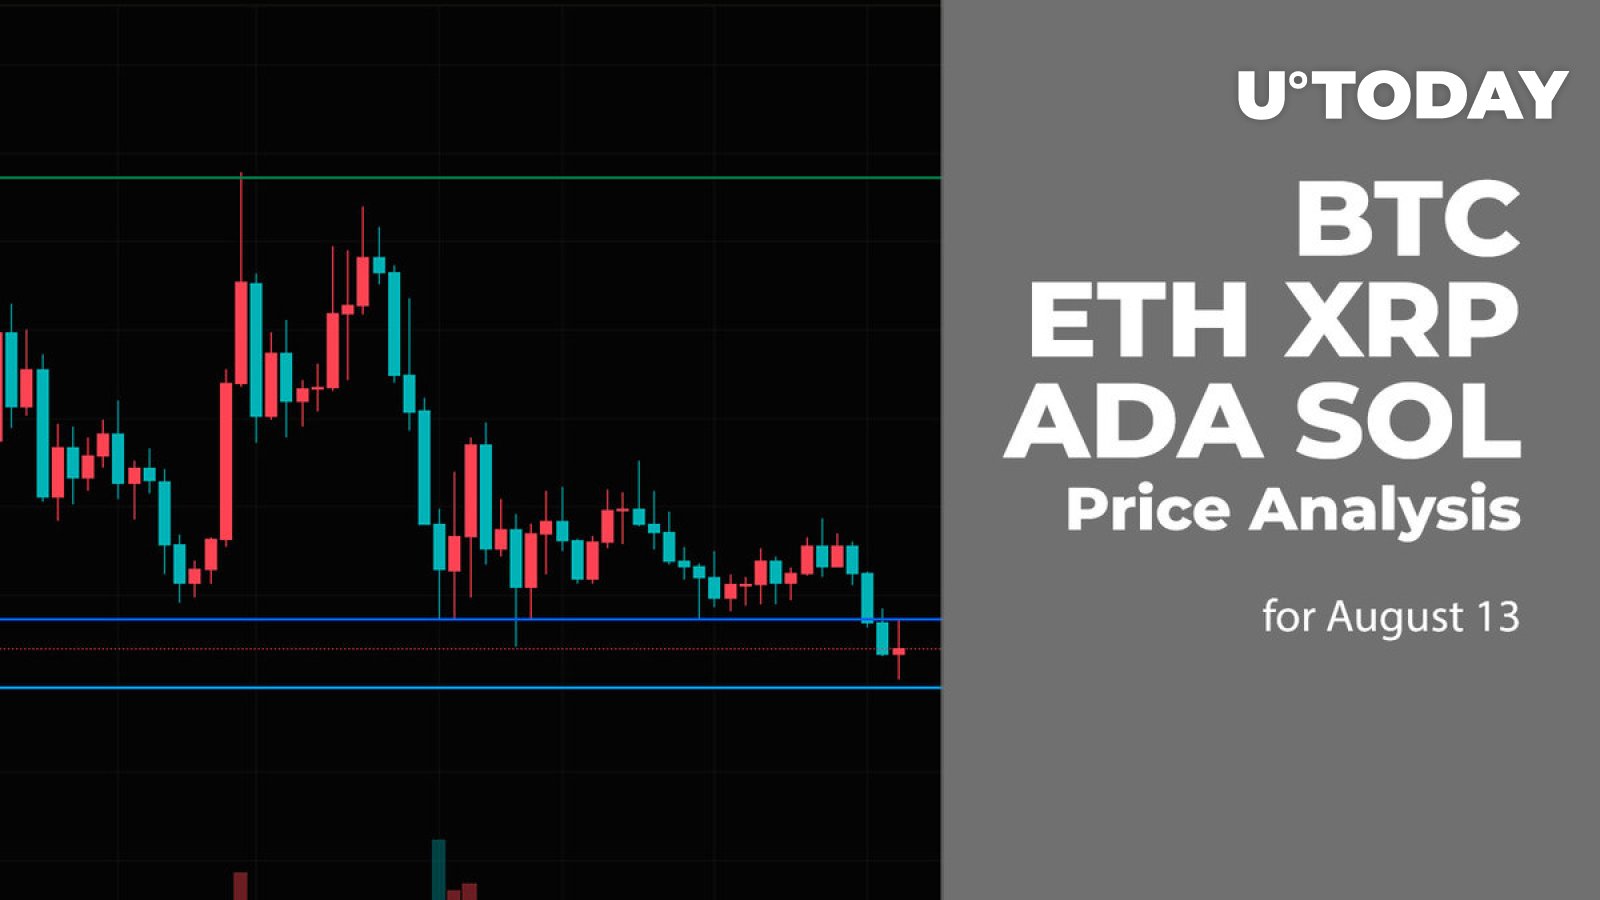 btc-eth-xrp-ada-and-sol-price-analysis-for-august-13